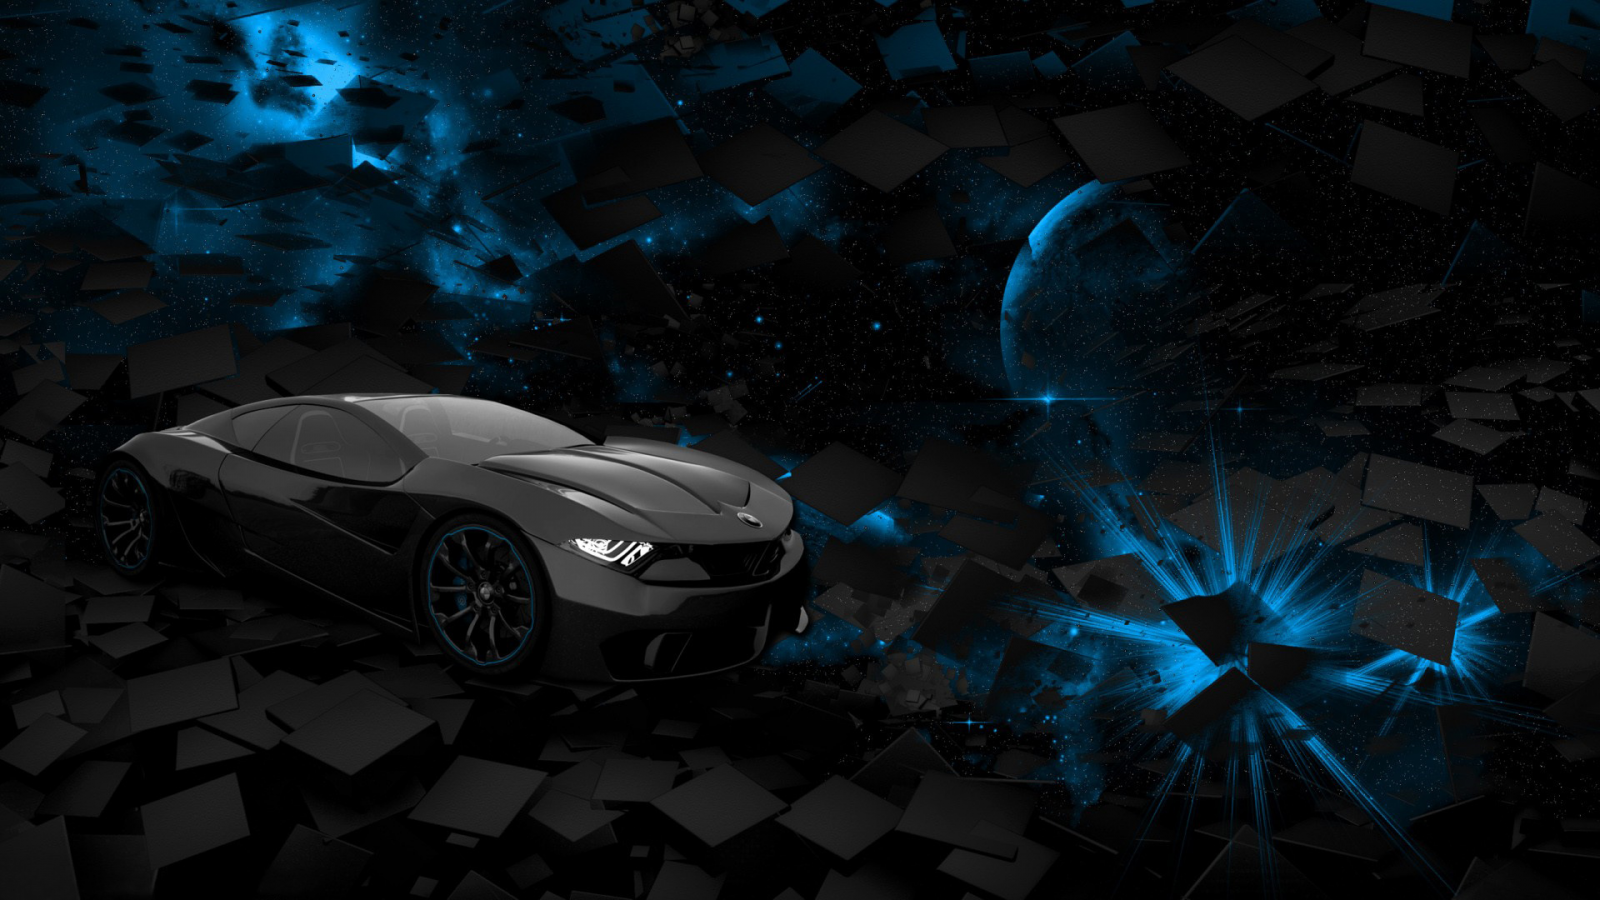 black, square, background, car, rendering, space, blue, planet